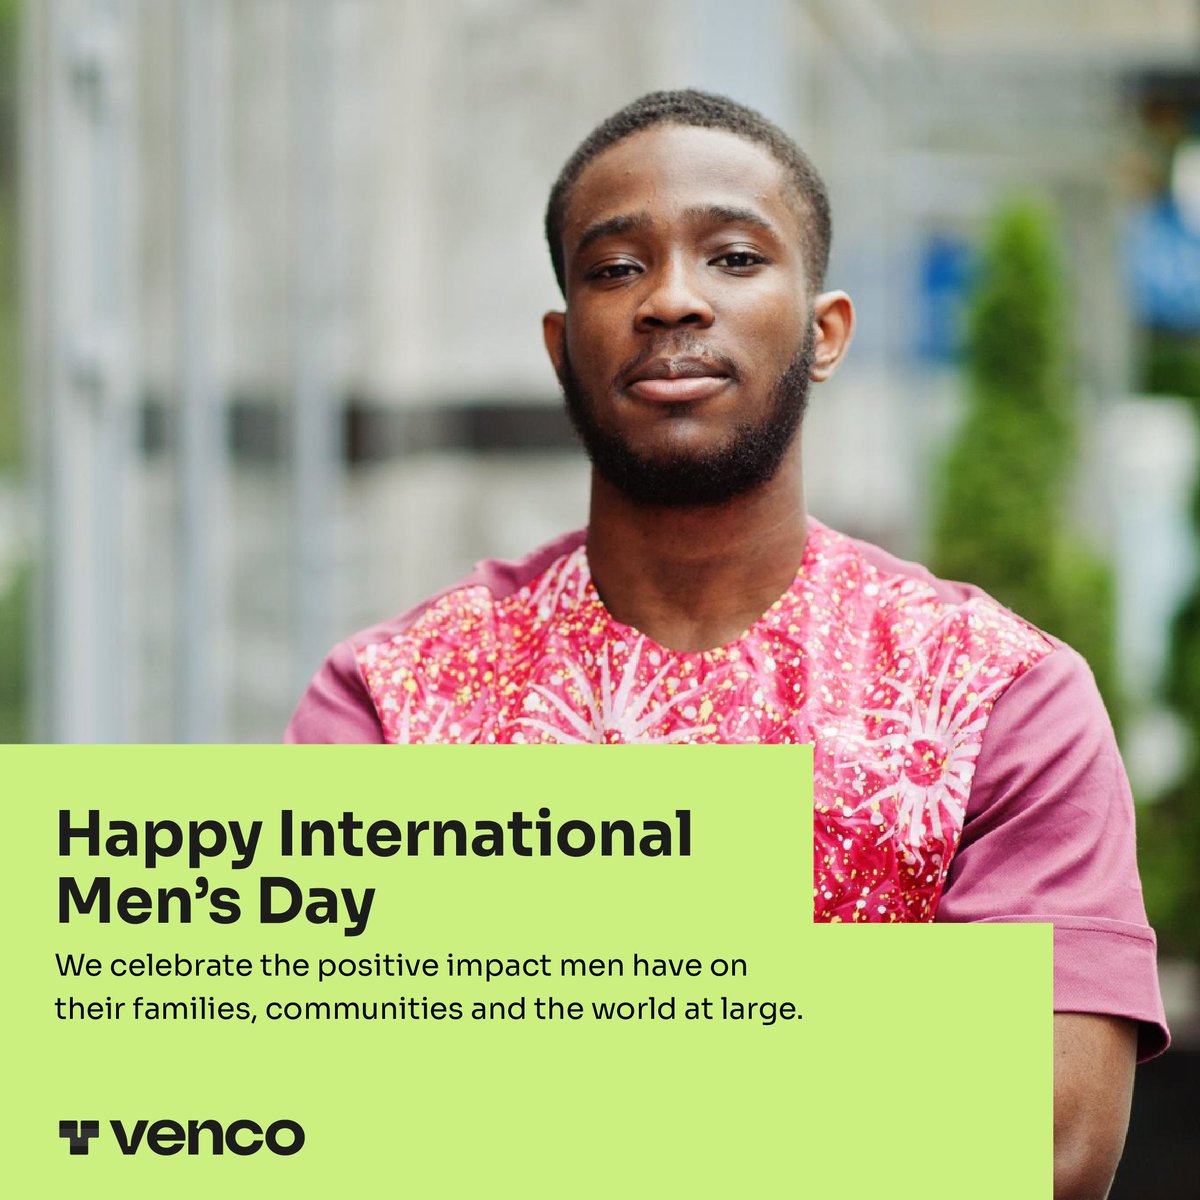 To each one man using their talents, creativity and hard work to make our communities and homes more secure and comfortable

Happy International Men’s Day from Venco.

#venco #vencoafrica #facilitymanagers #techbro #IMD2023 #internationalmensday